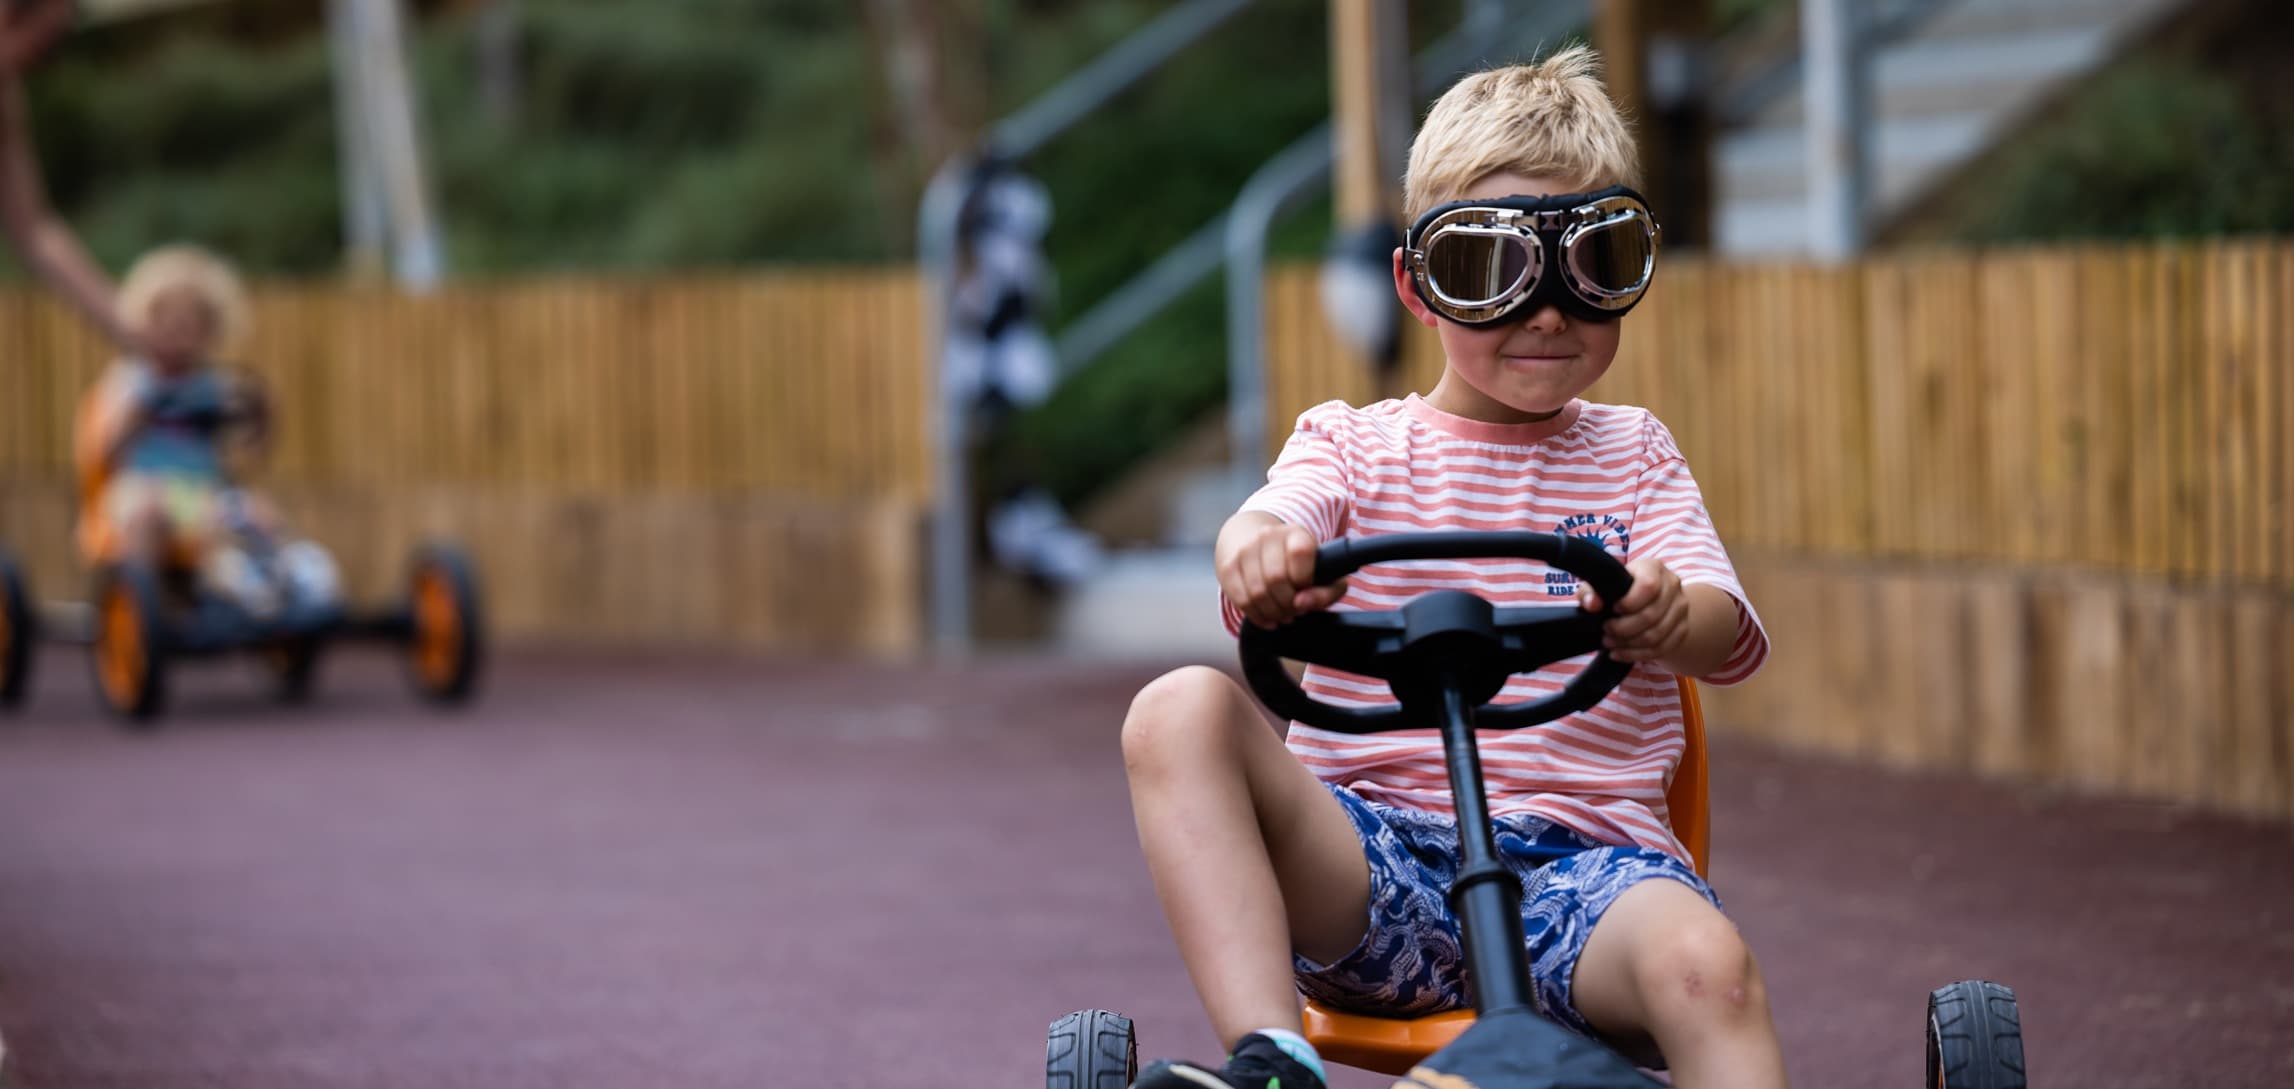 Wacky Racers, Boy With Goggles